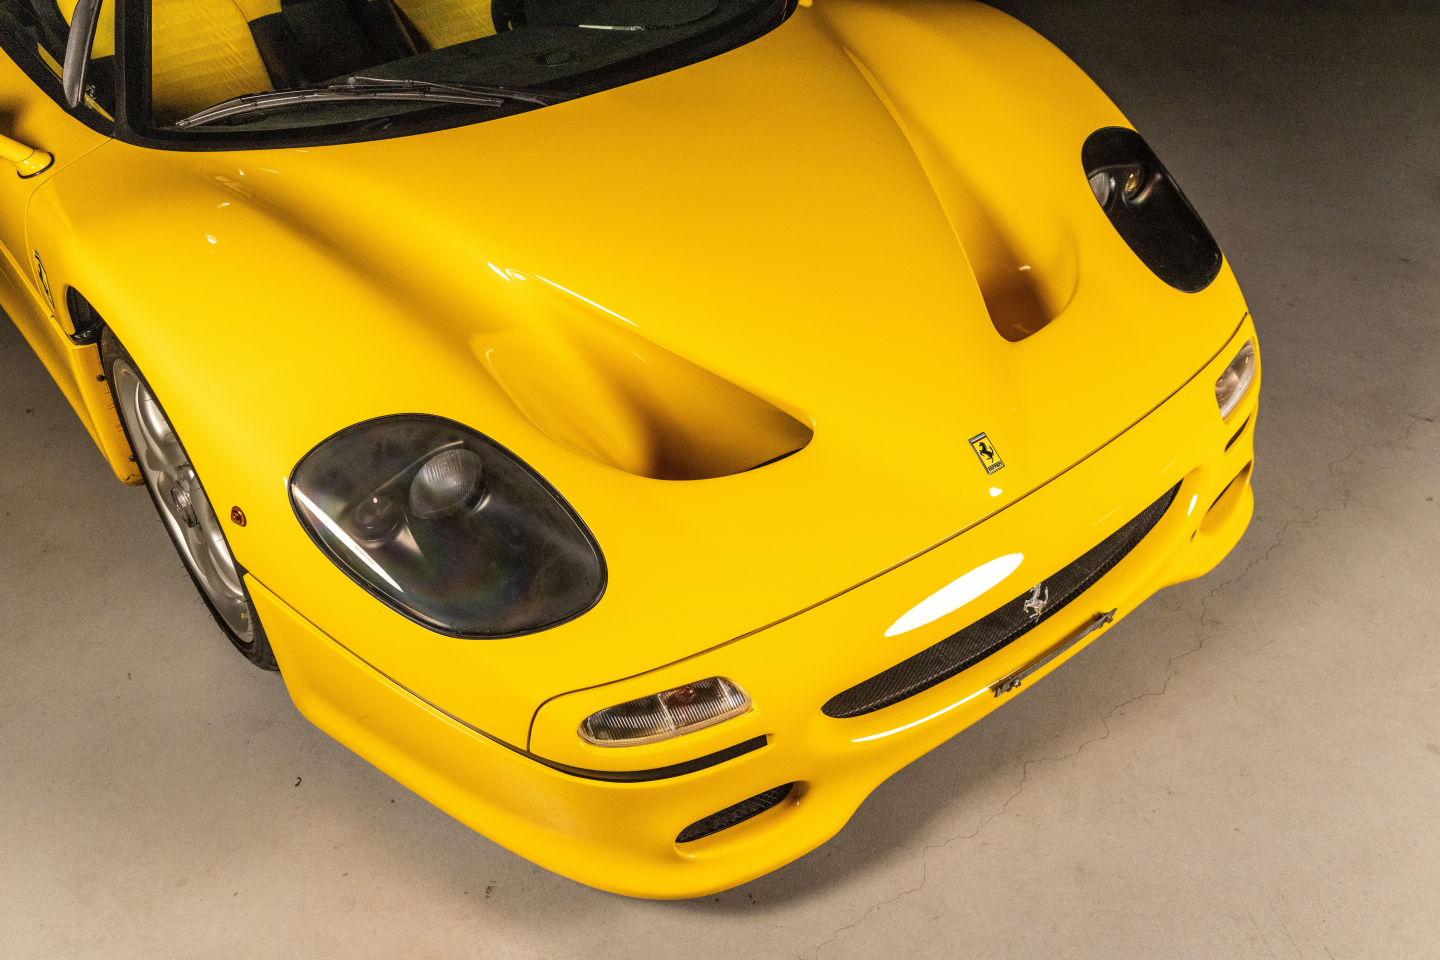 Aerial view of the front of a yellow Ferrari F50